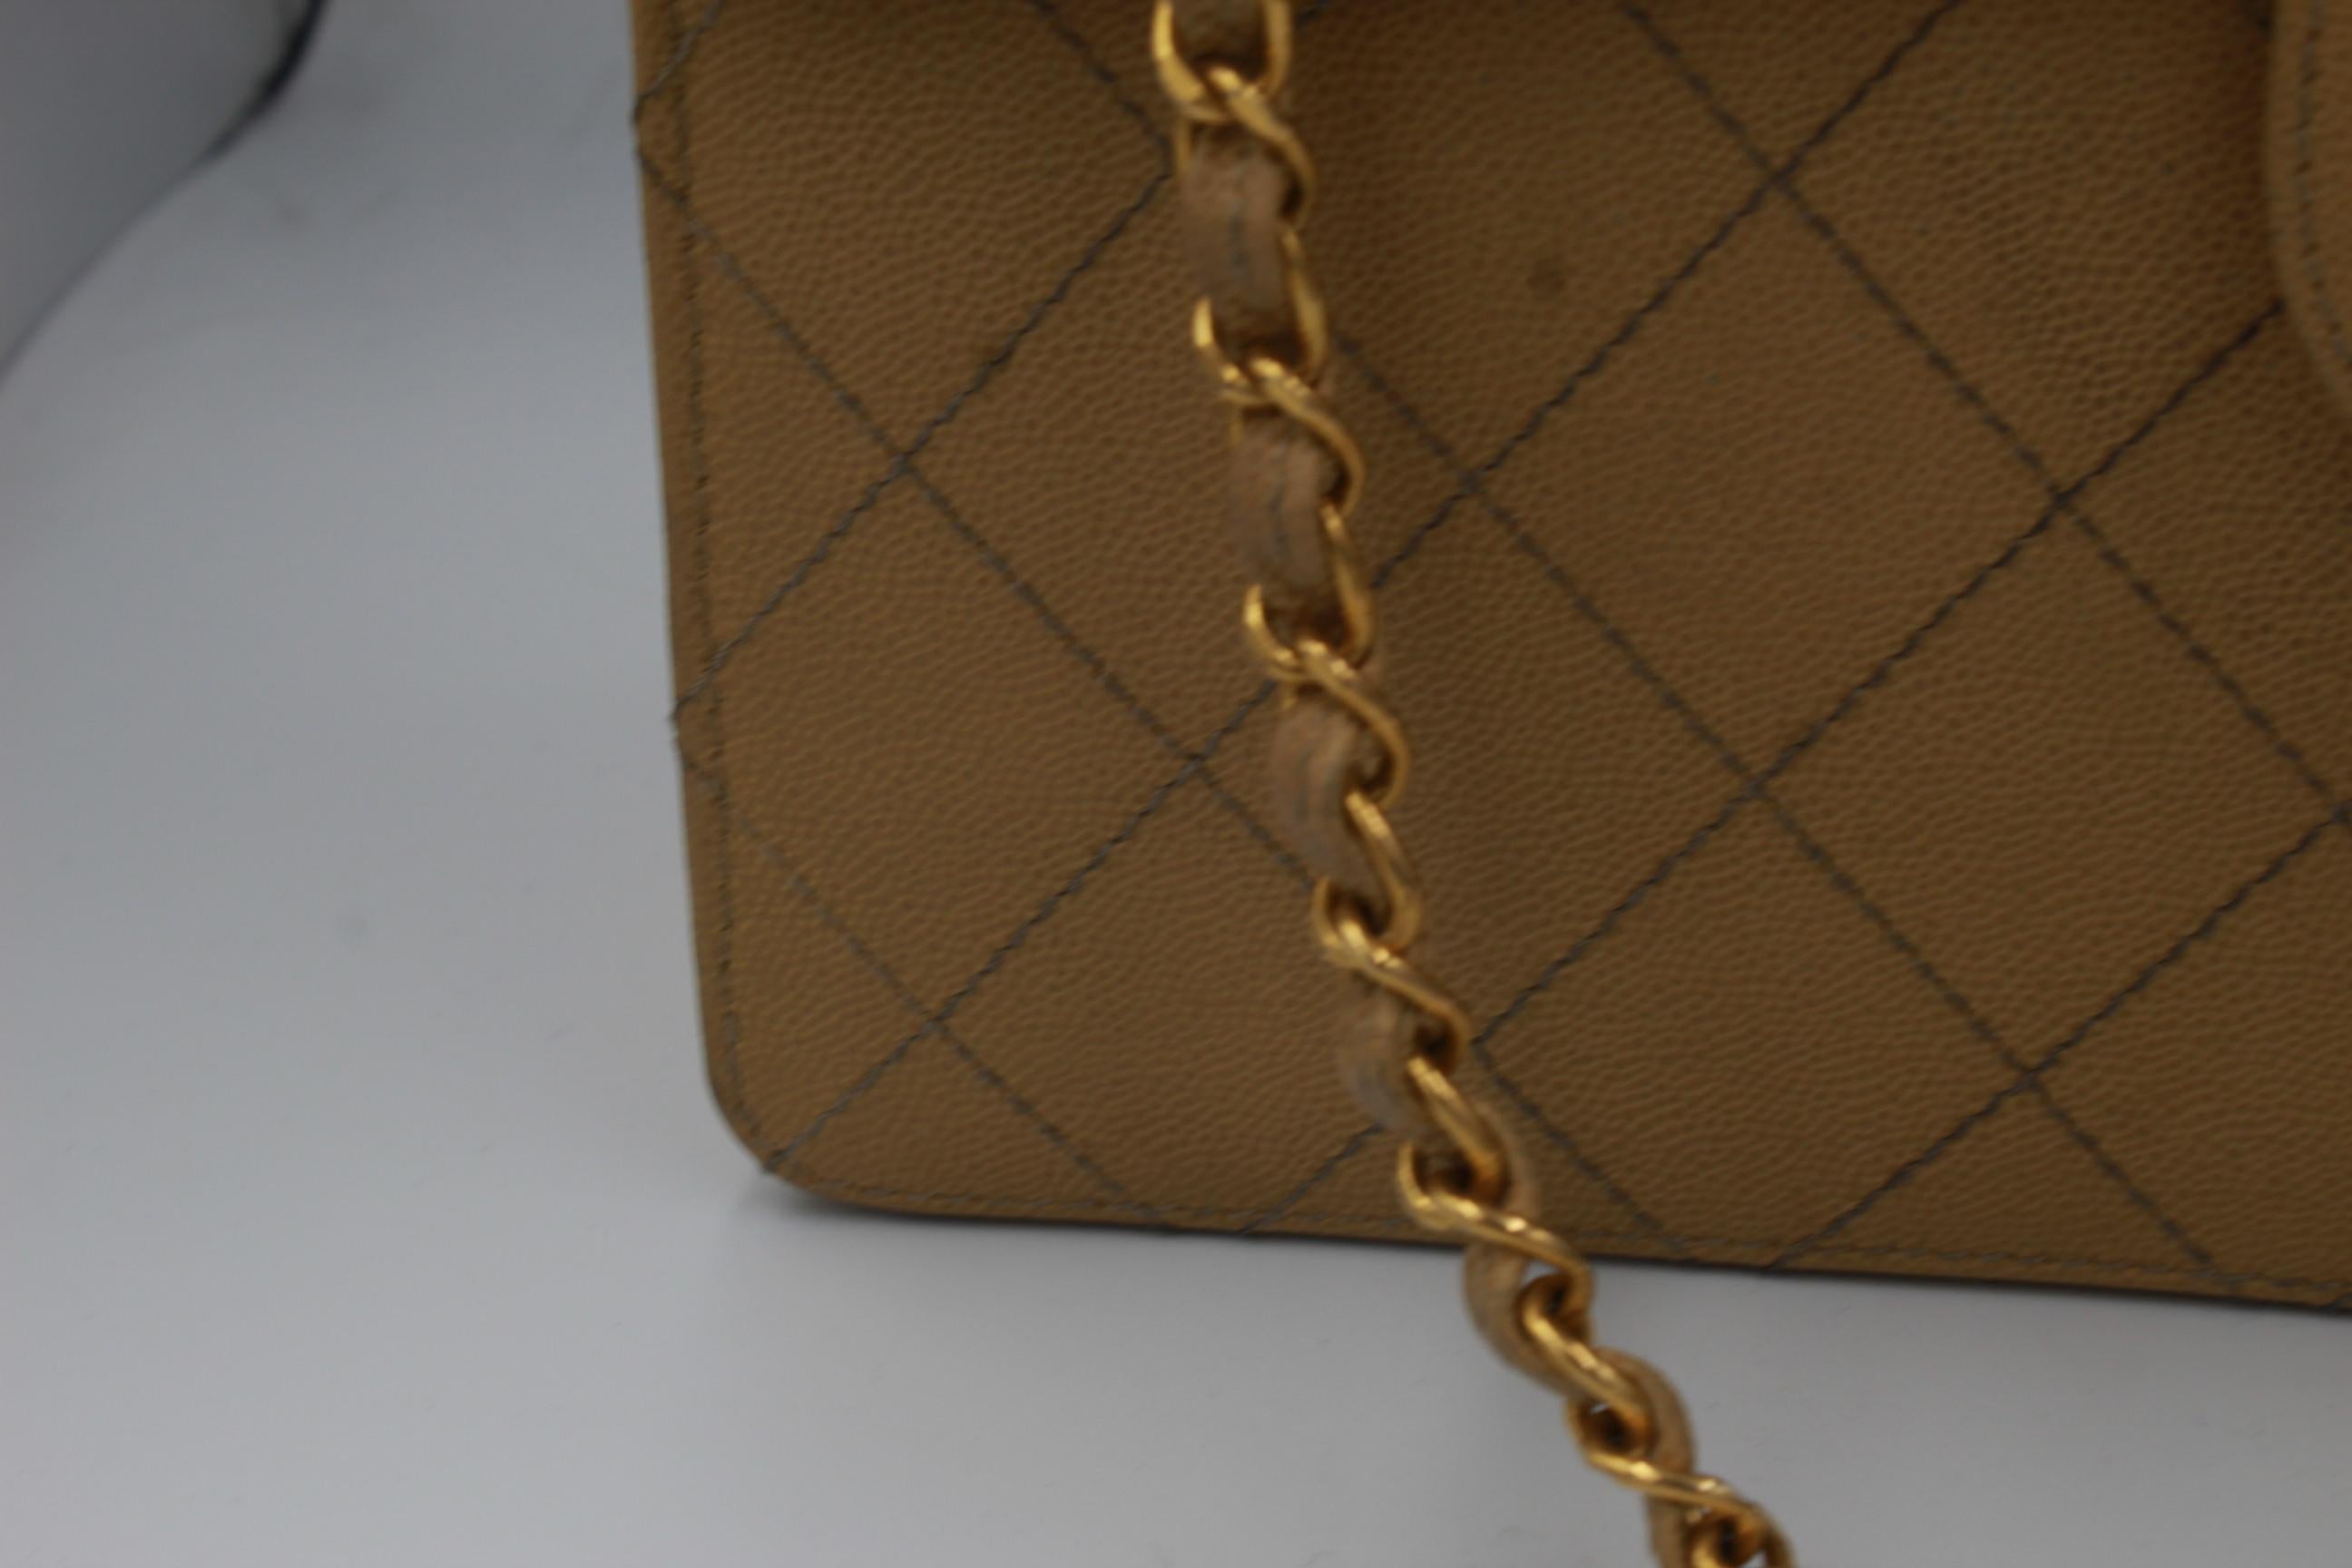 Brown Vintage Chanel Timeless  Simple flap bag in grained leather